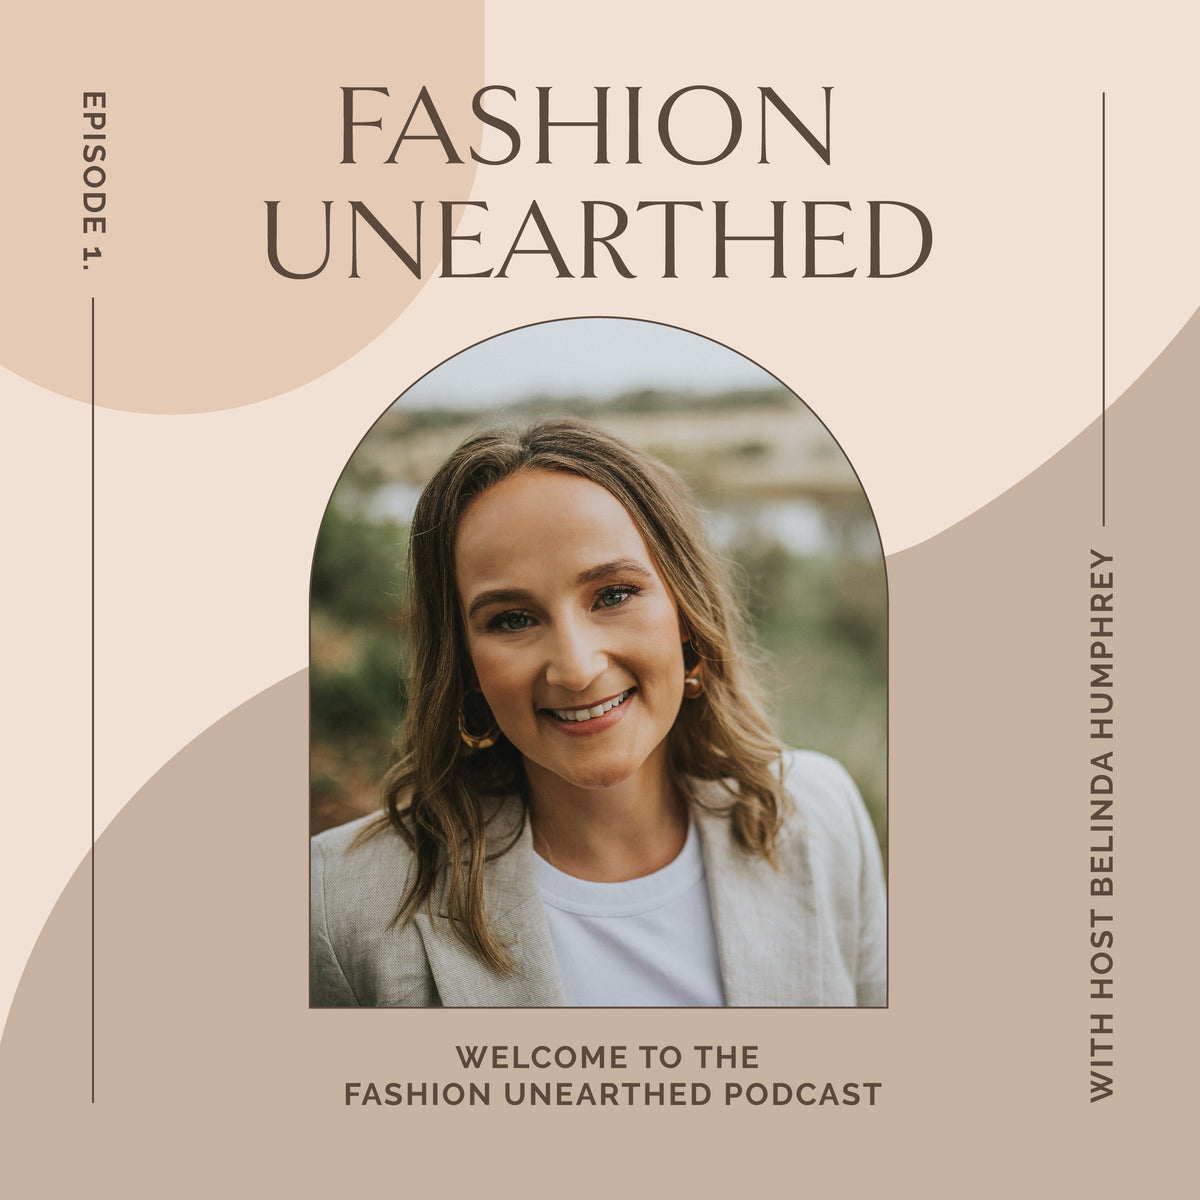 Episode 1: Welcome to the Fashion Unearthed podcast